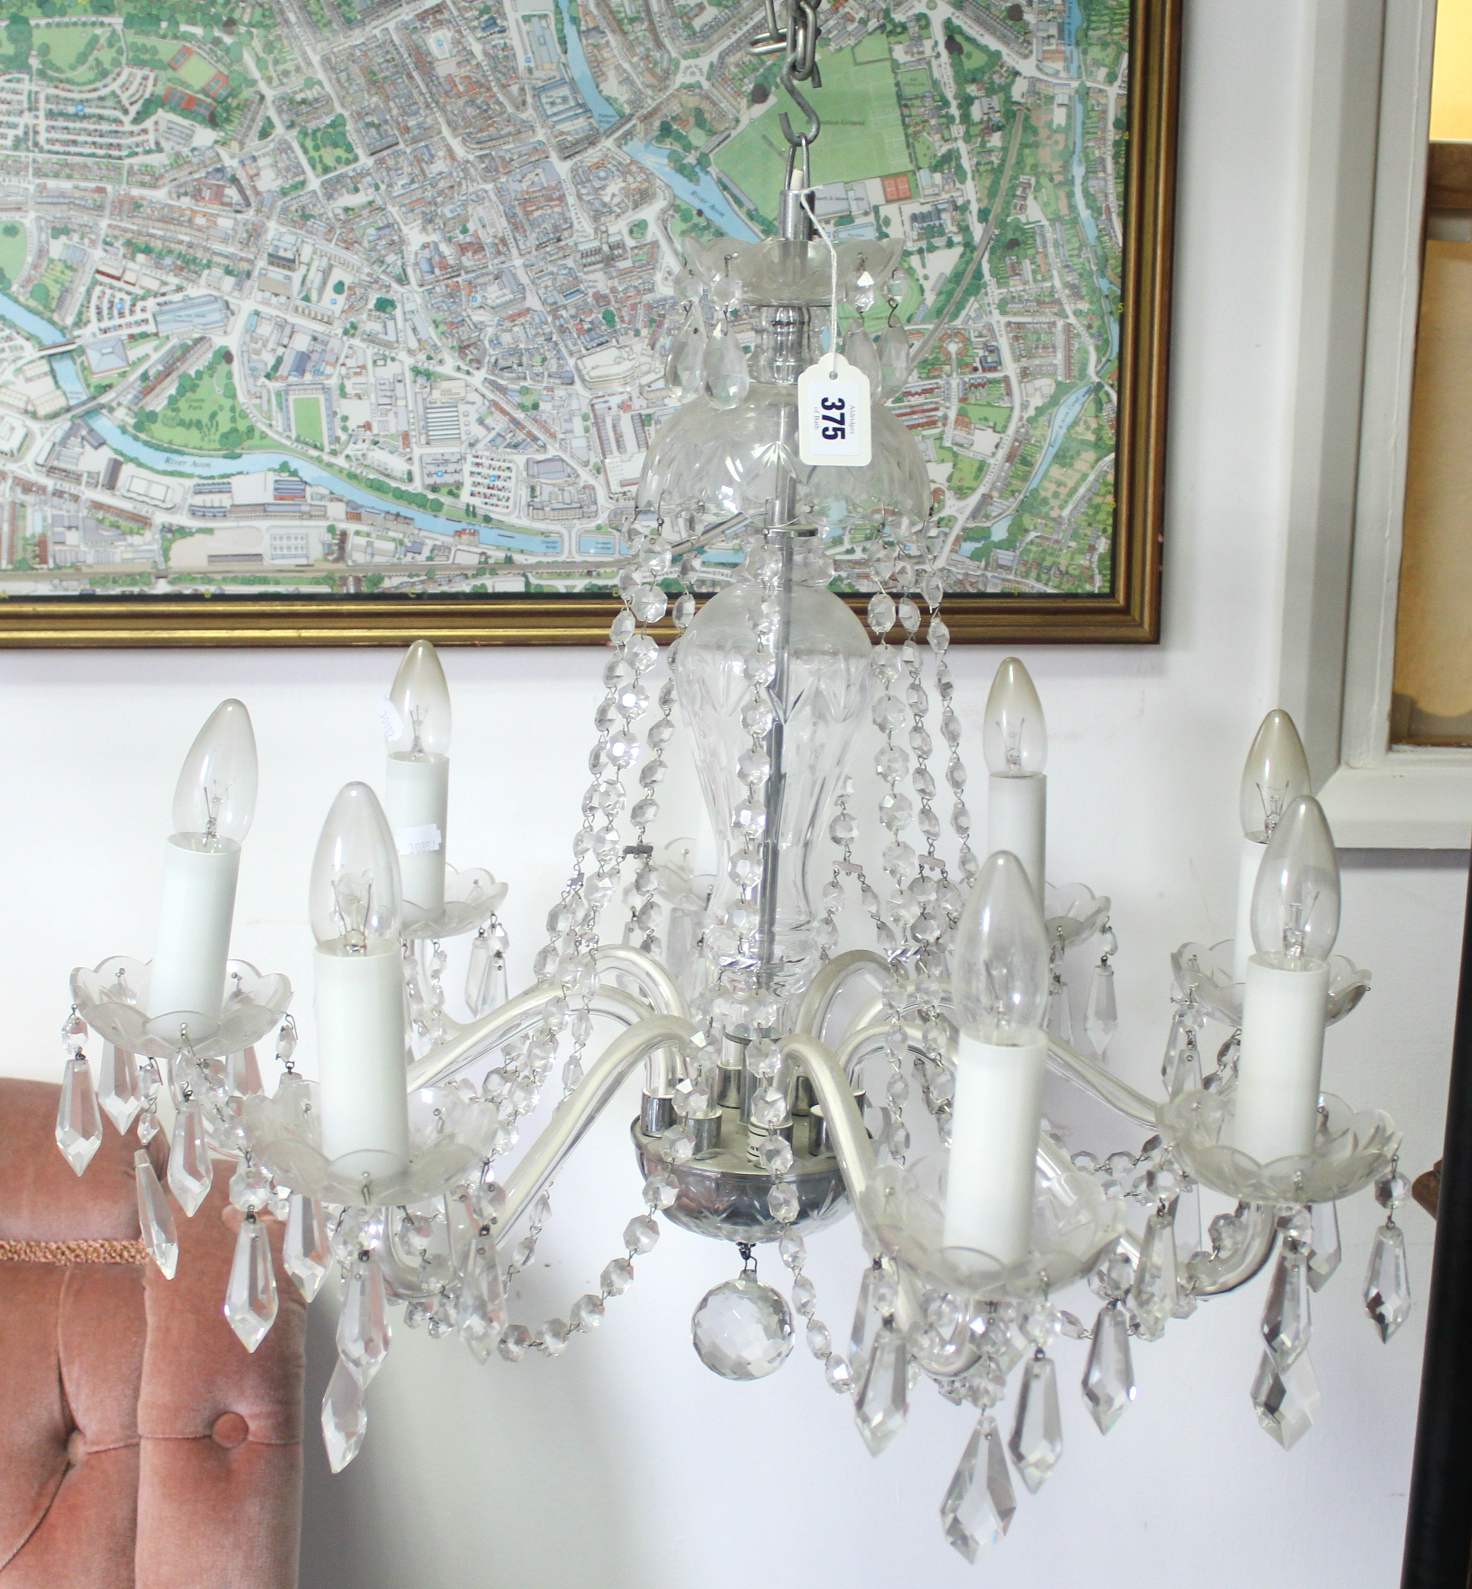 A cut glass chandelier with eight scroll arms with pendant prism drops, the slender baluster